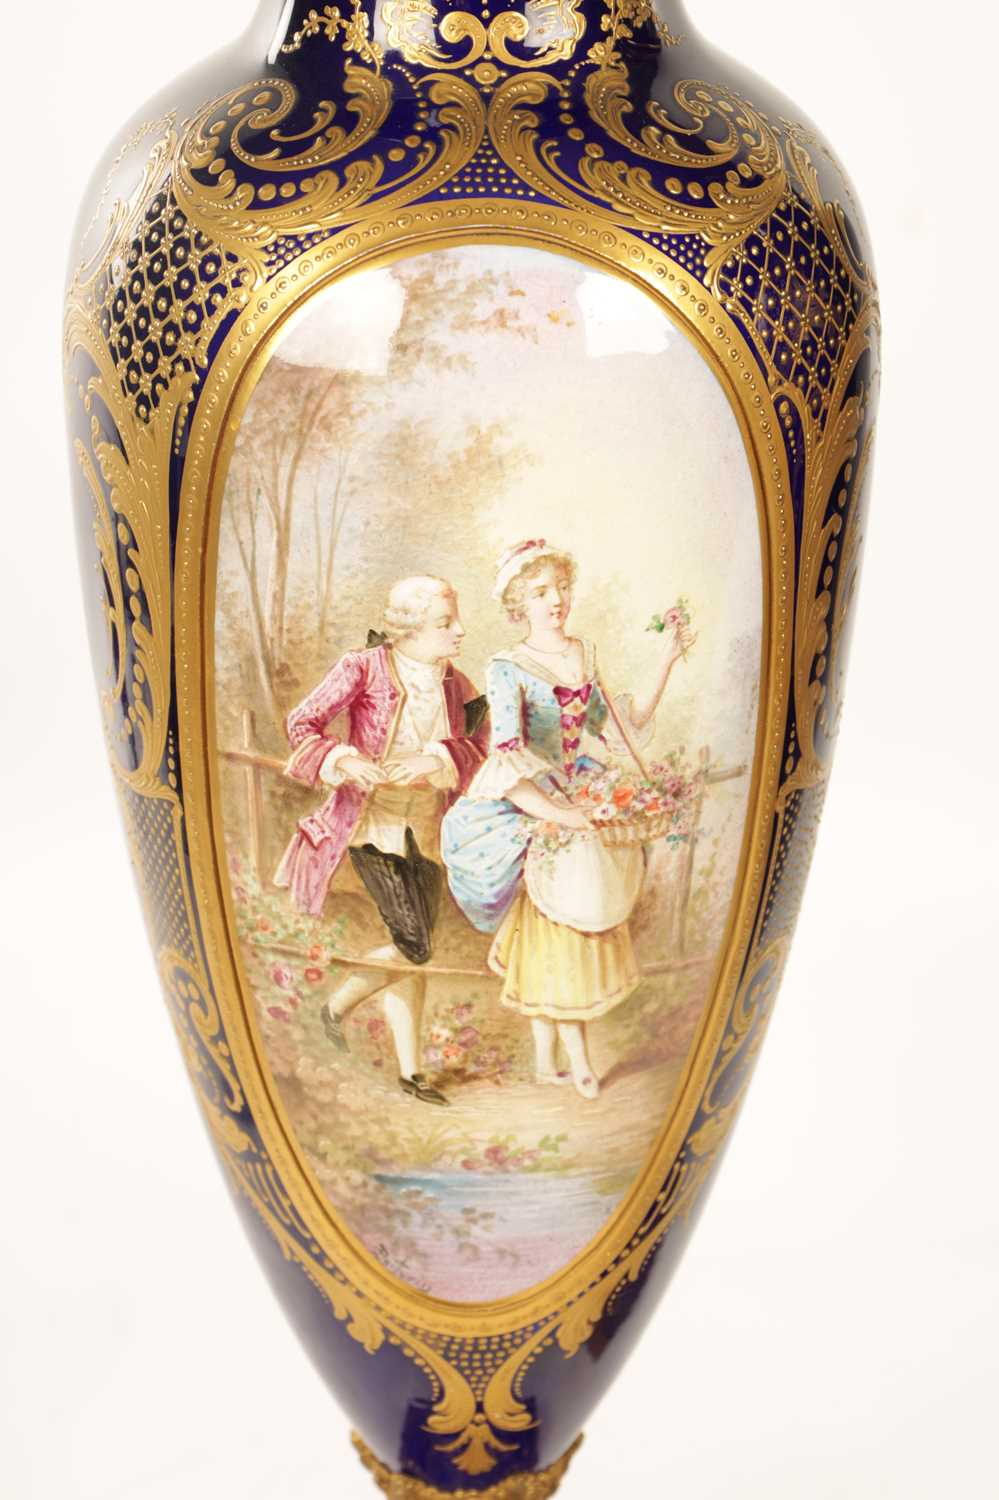 A PAIR OF LATE 19TH-CENTURY SERVES STYLE PORCELAIN LARGE CABINET VASES - Image 3 of 20